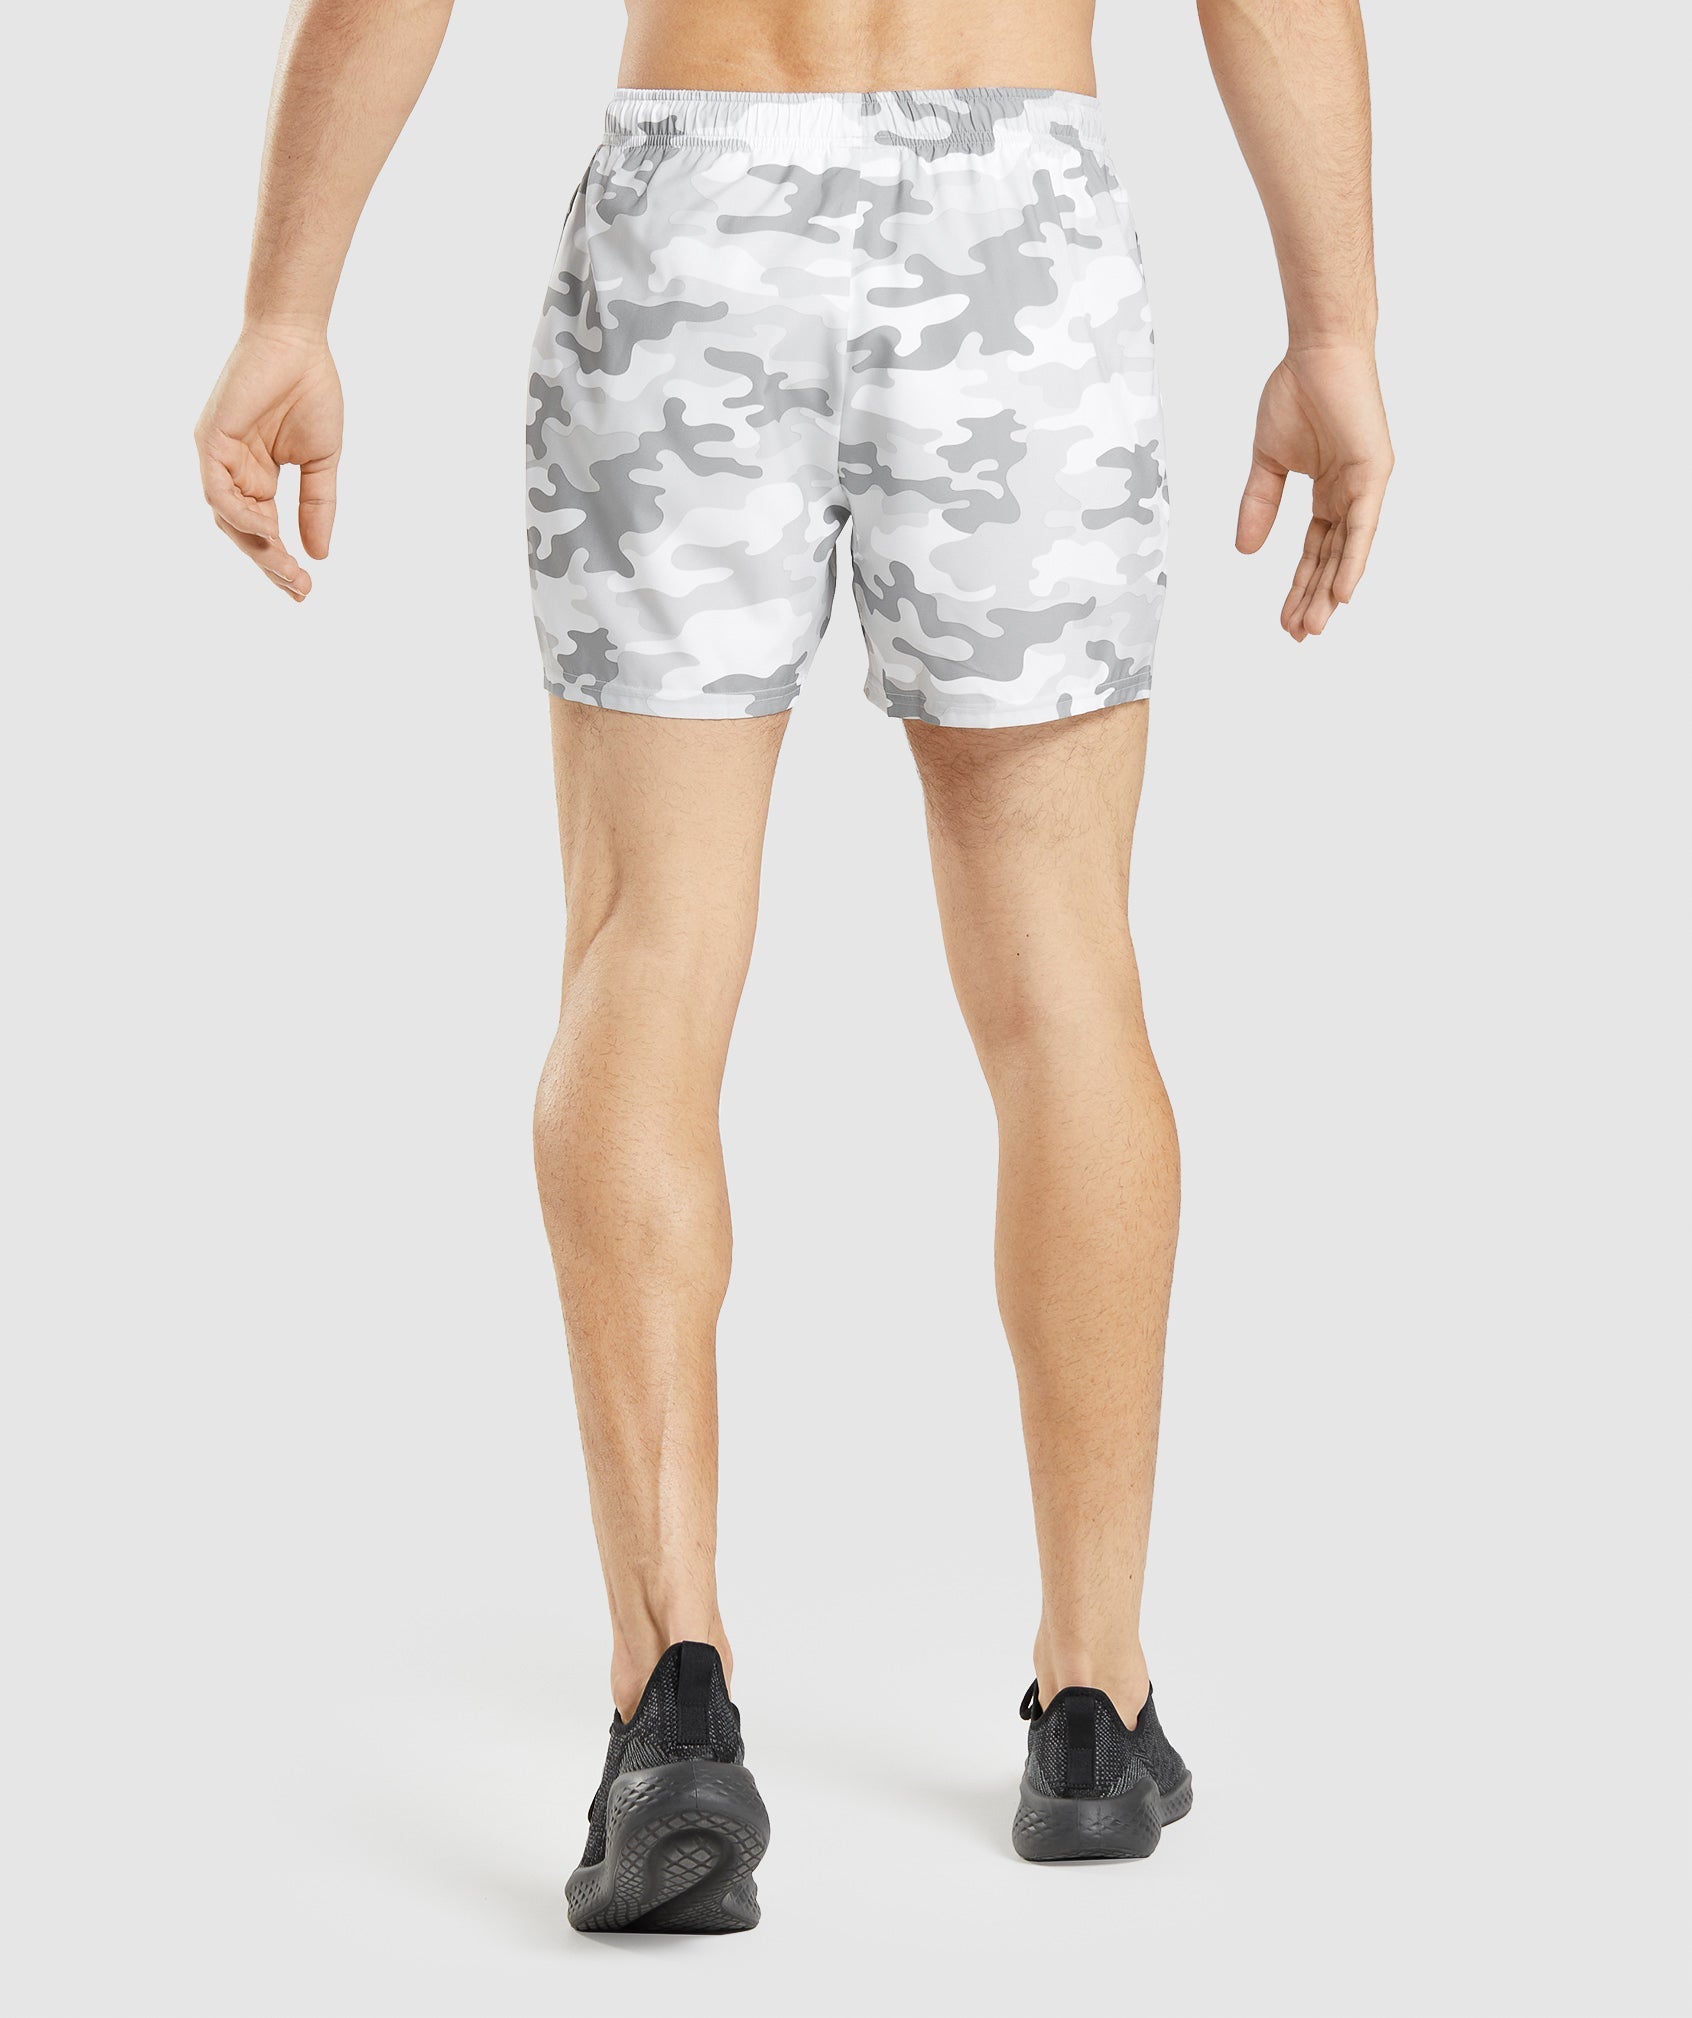 Arrival 5" Shorts in Light Grey Print - view 2